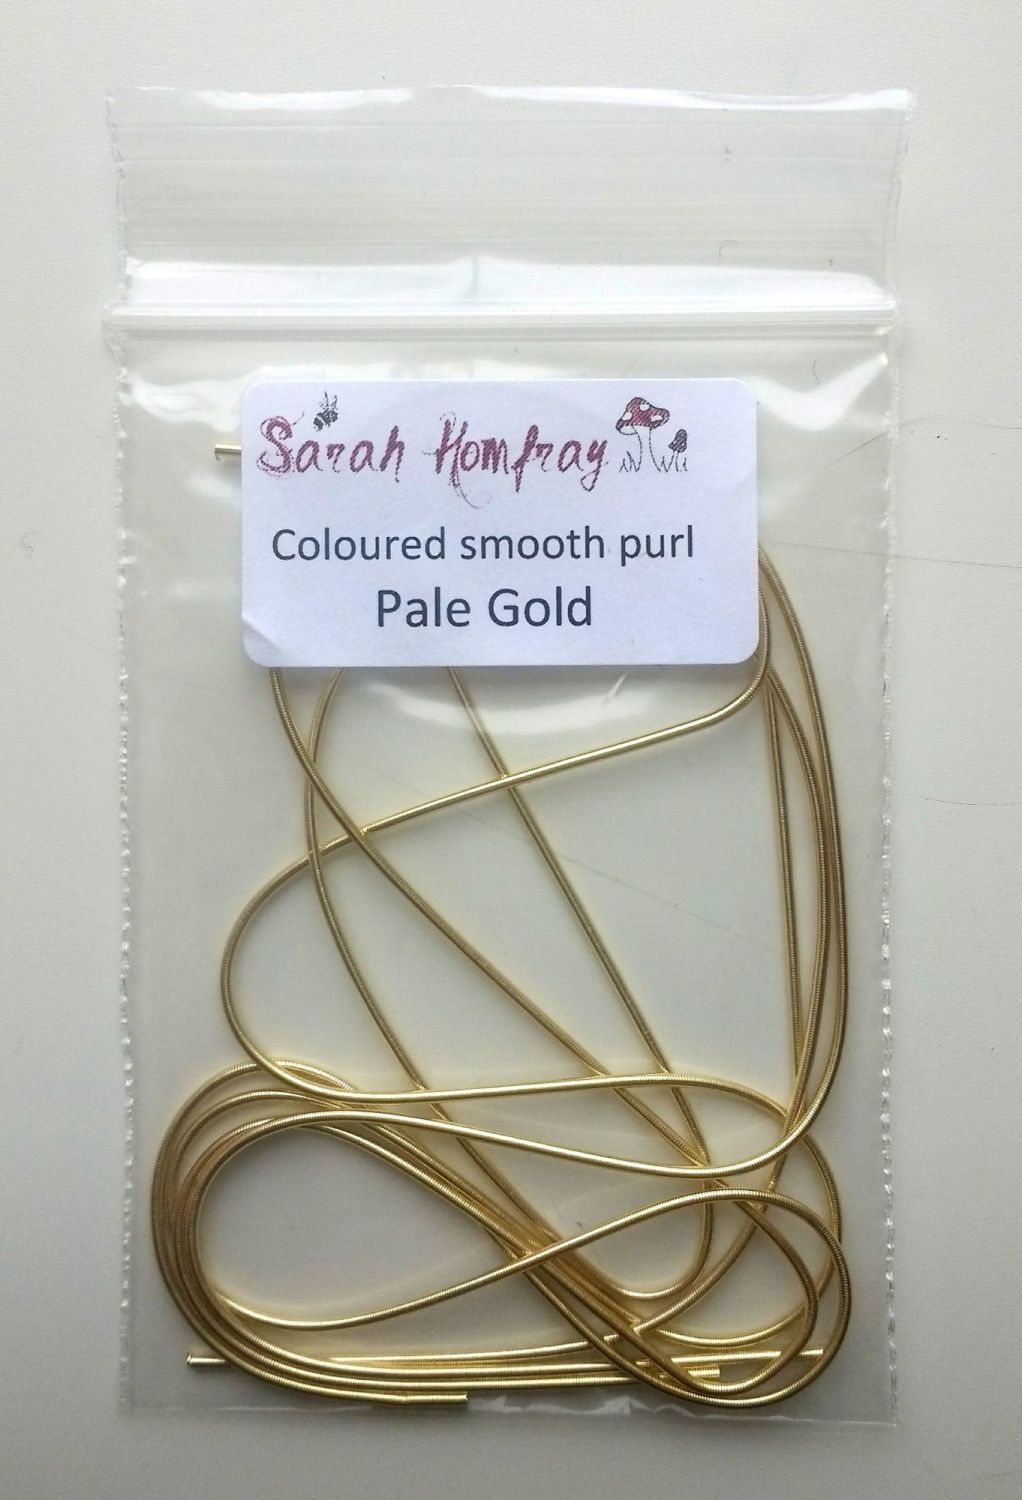 NEW! Coloured smooth purl no.6 - Pale Gold